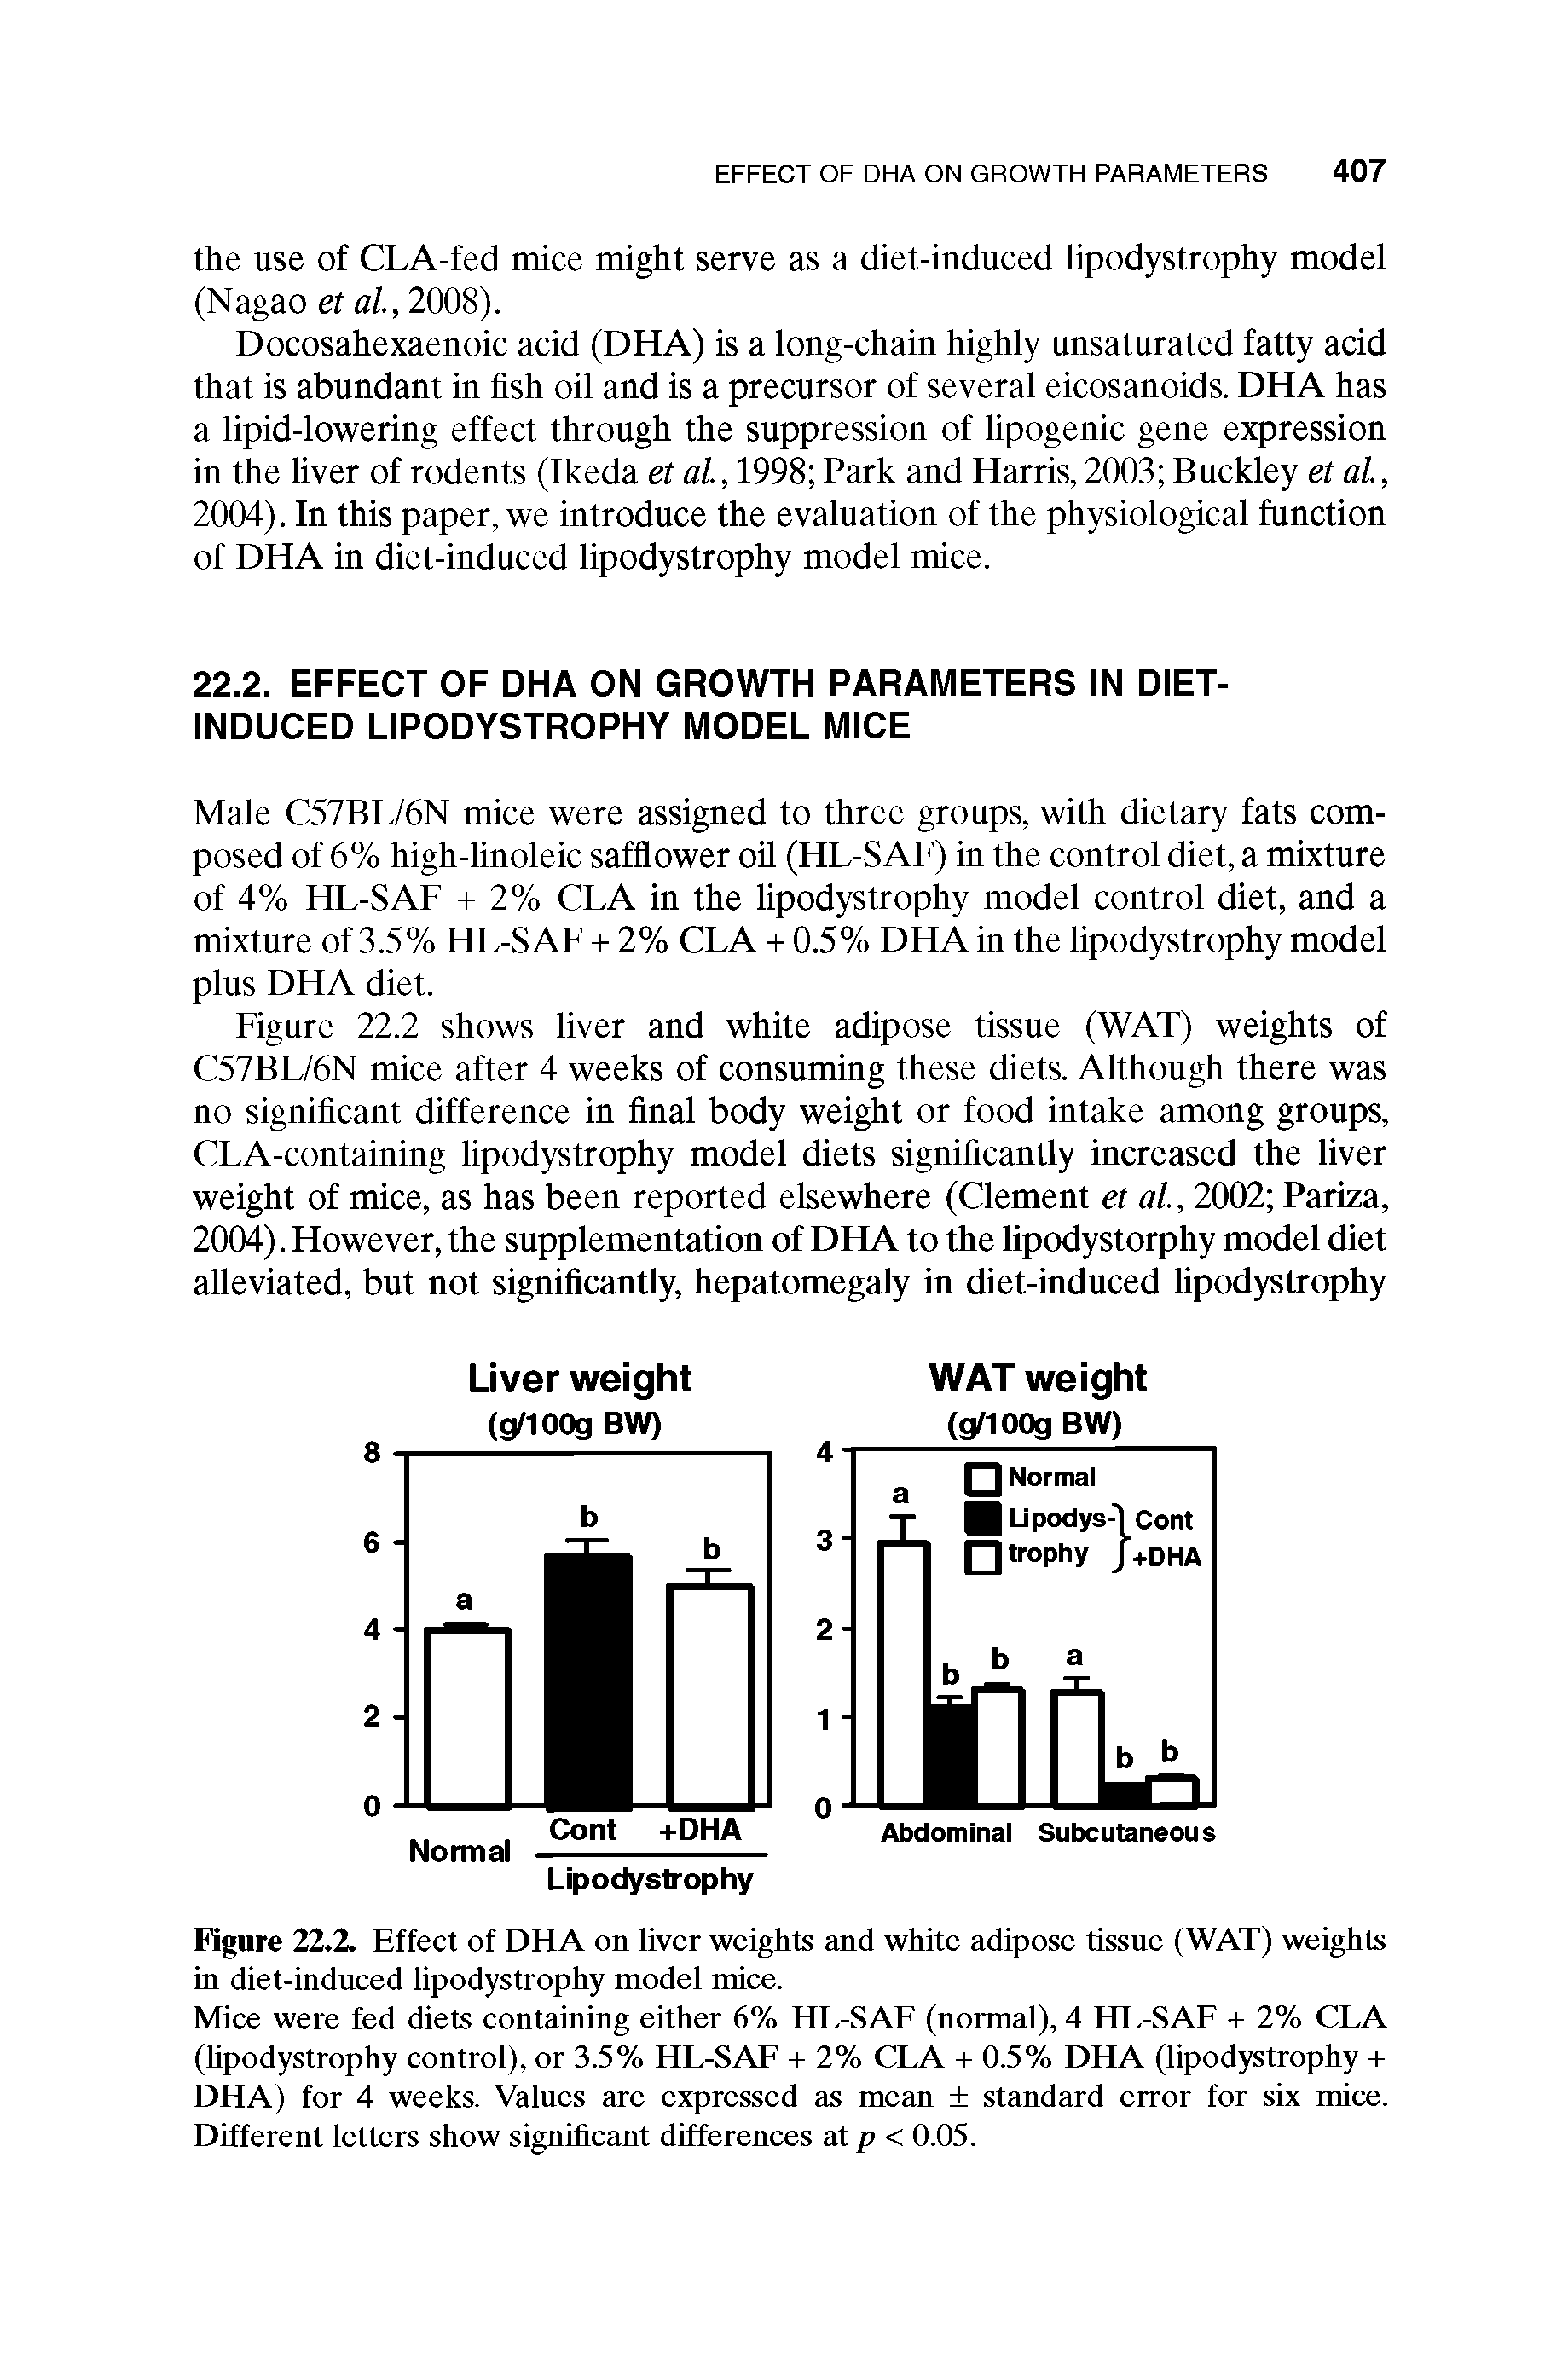 Figure 22.2. Effect of DHA on liver weights and white adipose tissue (WAT) weights in diet-induced lipodystrophy model mice.